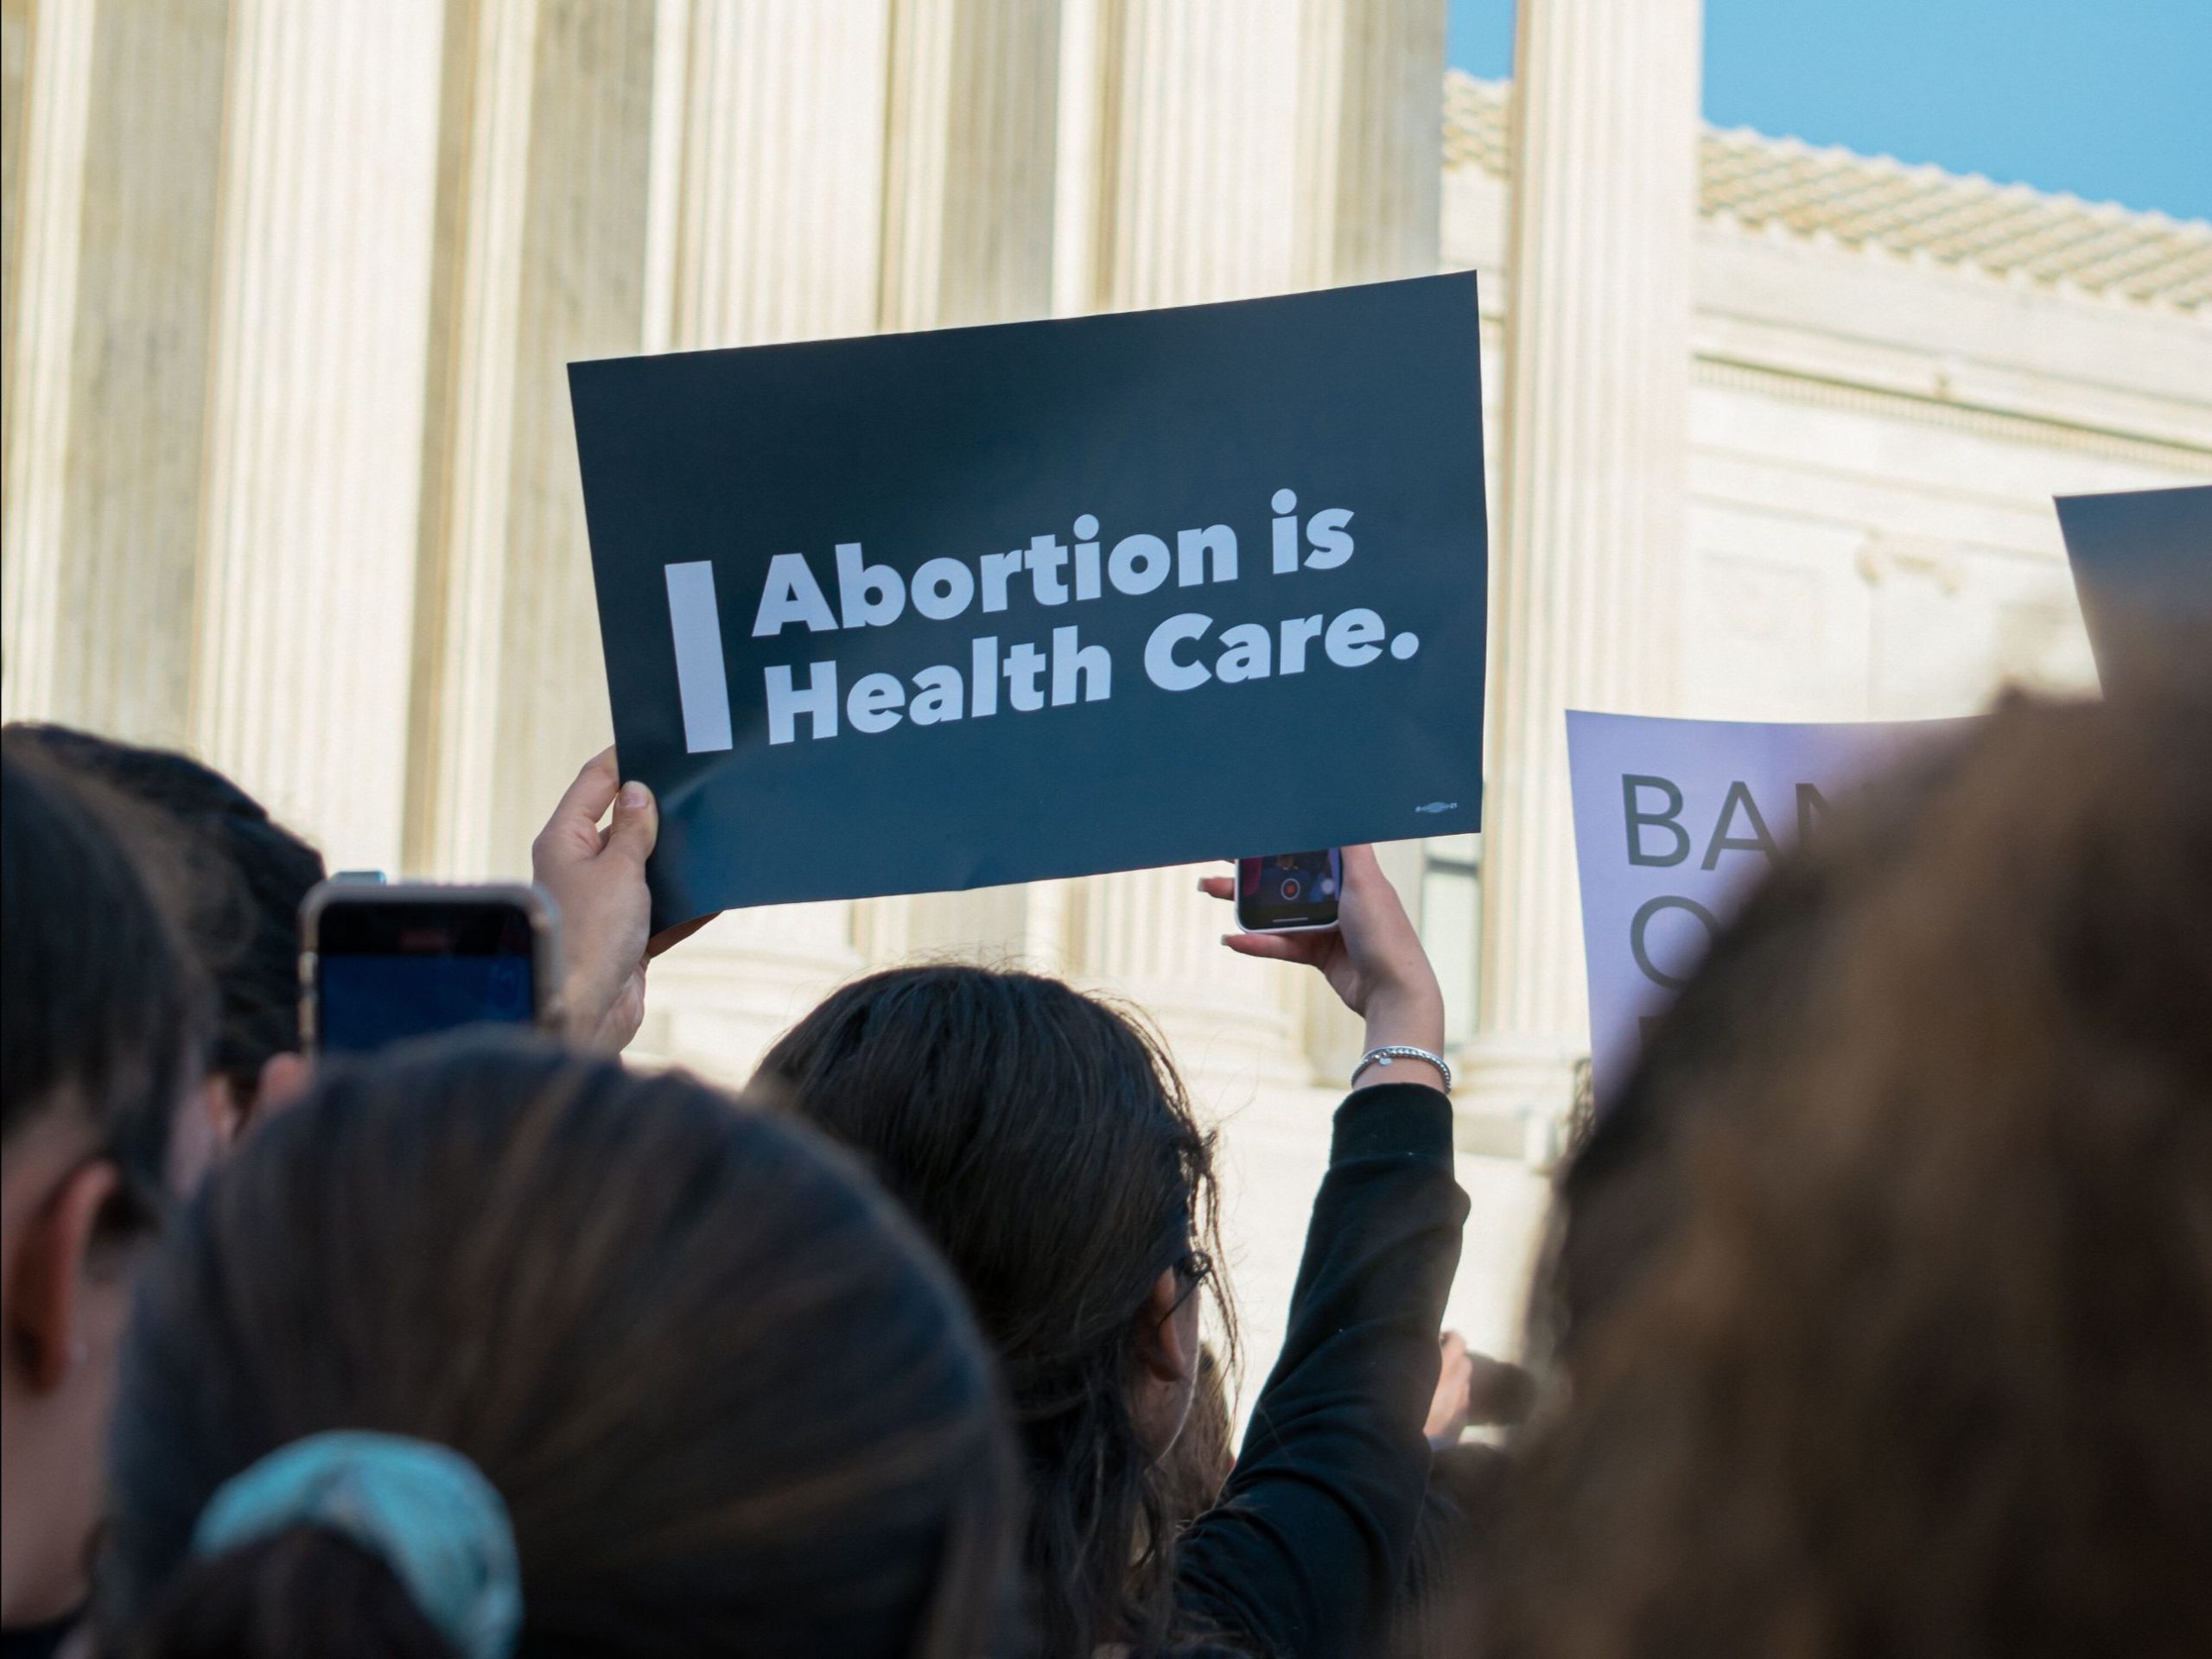 A person holding up a sign that says "Abortion is health care" in a group of people at an outdoor protest